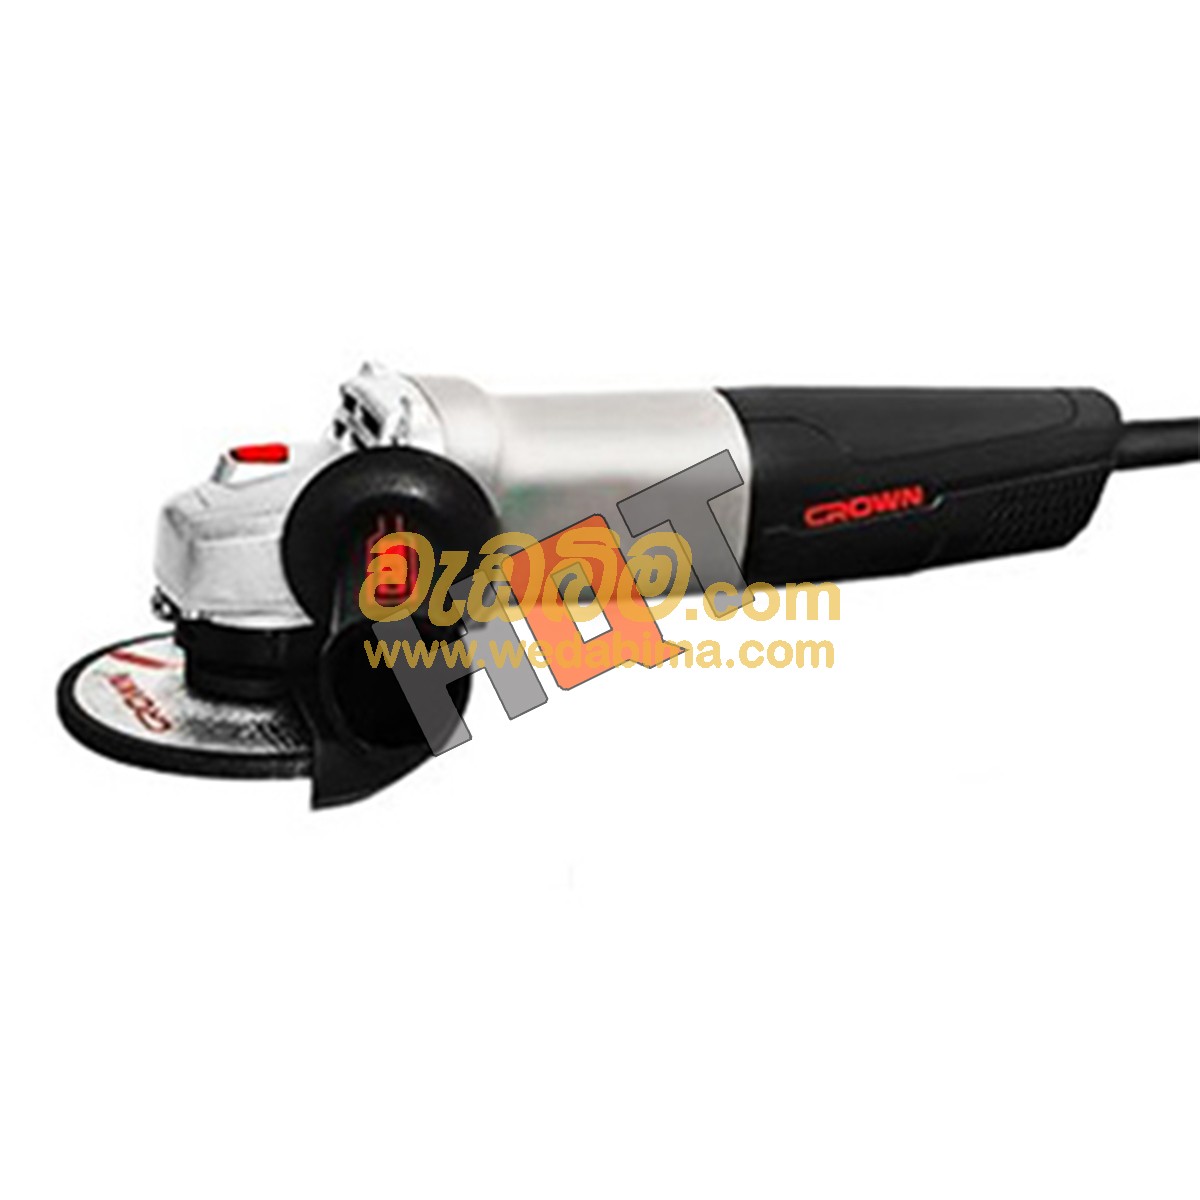 Cover image for CROWN Angle Grinder 860W 4 1/2"